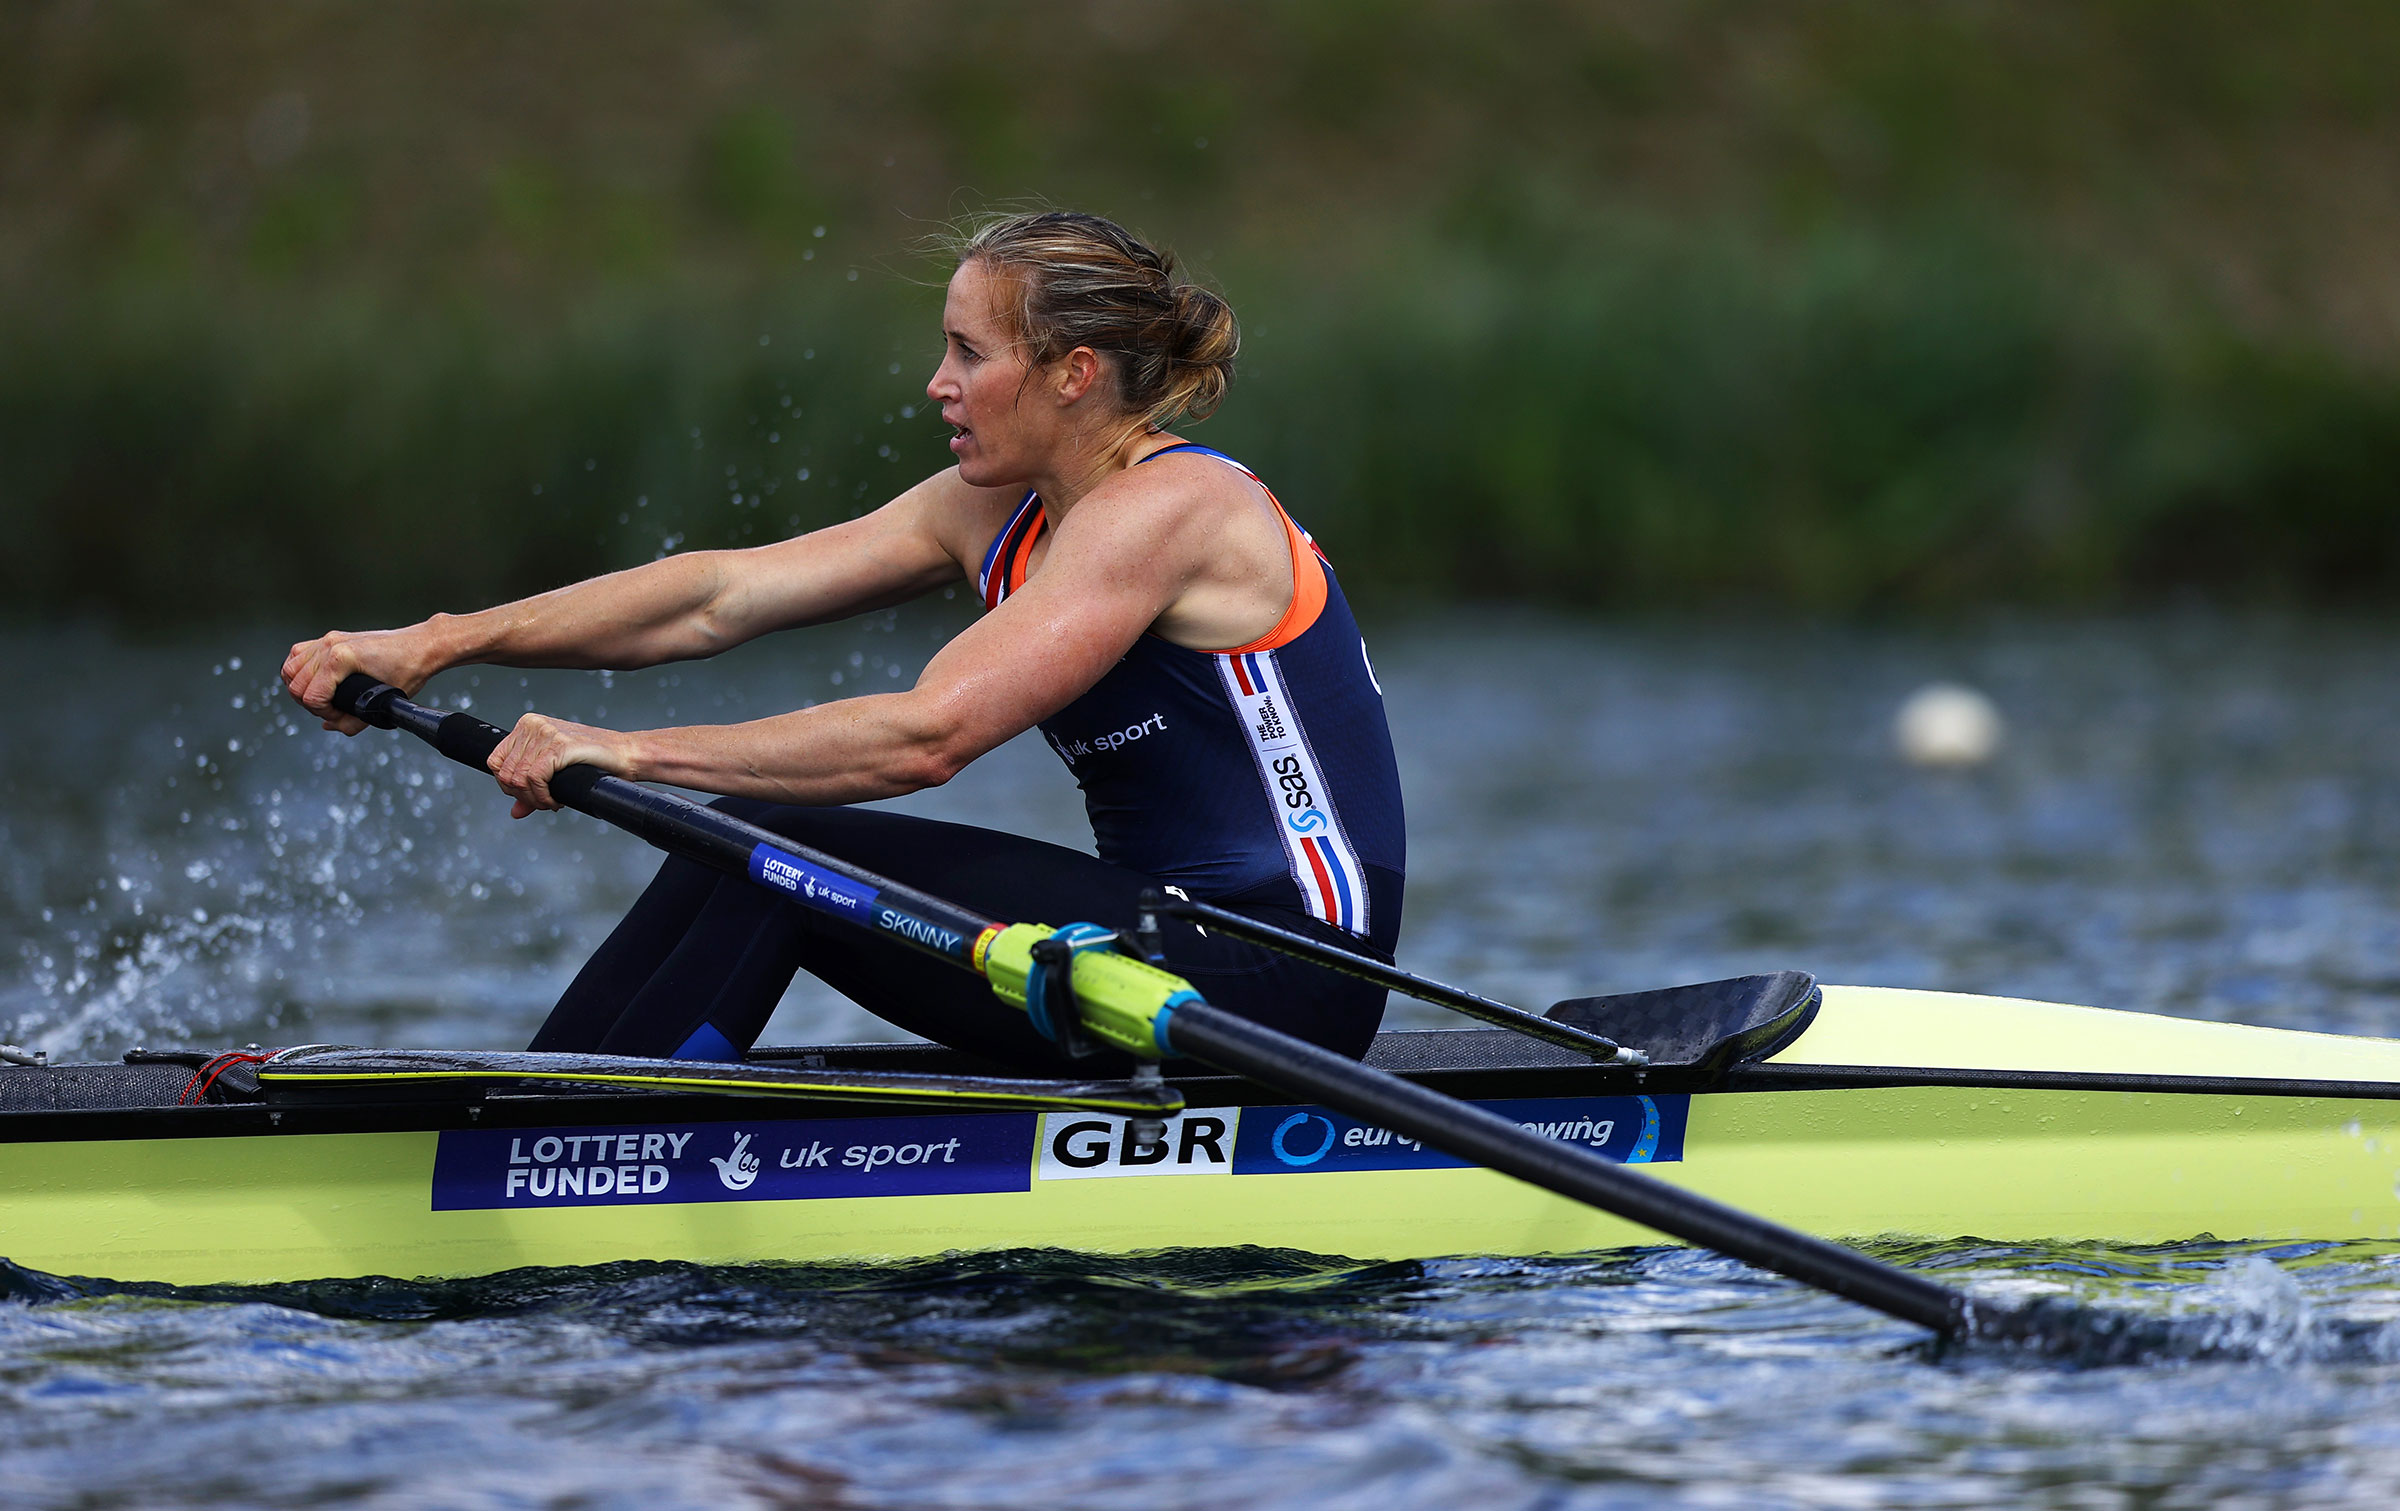 Helen Glover MBE in action during a TeamGB Rowing Training Session on May 05, 2021 in Reading, England.